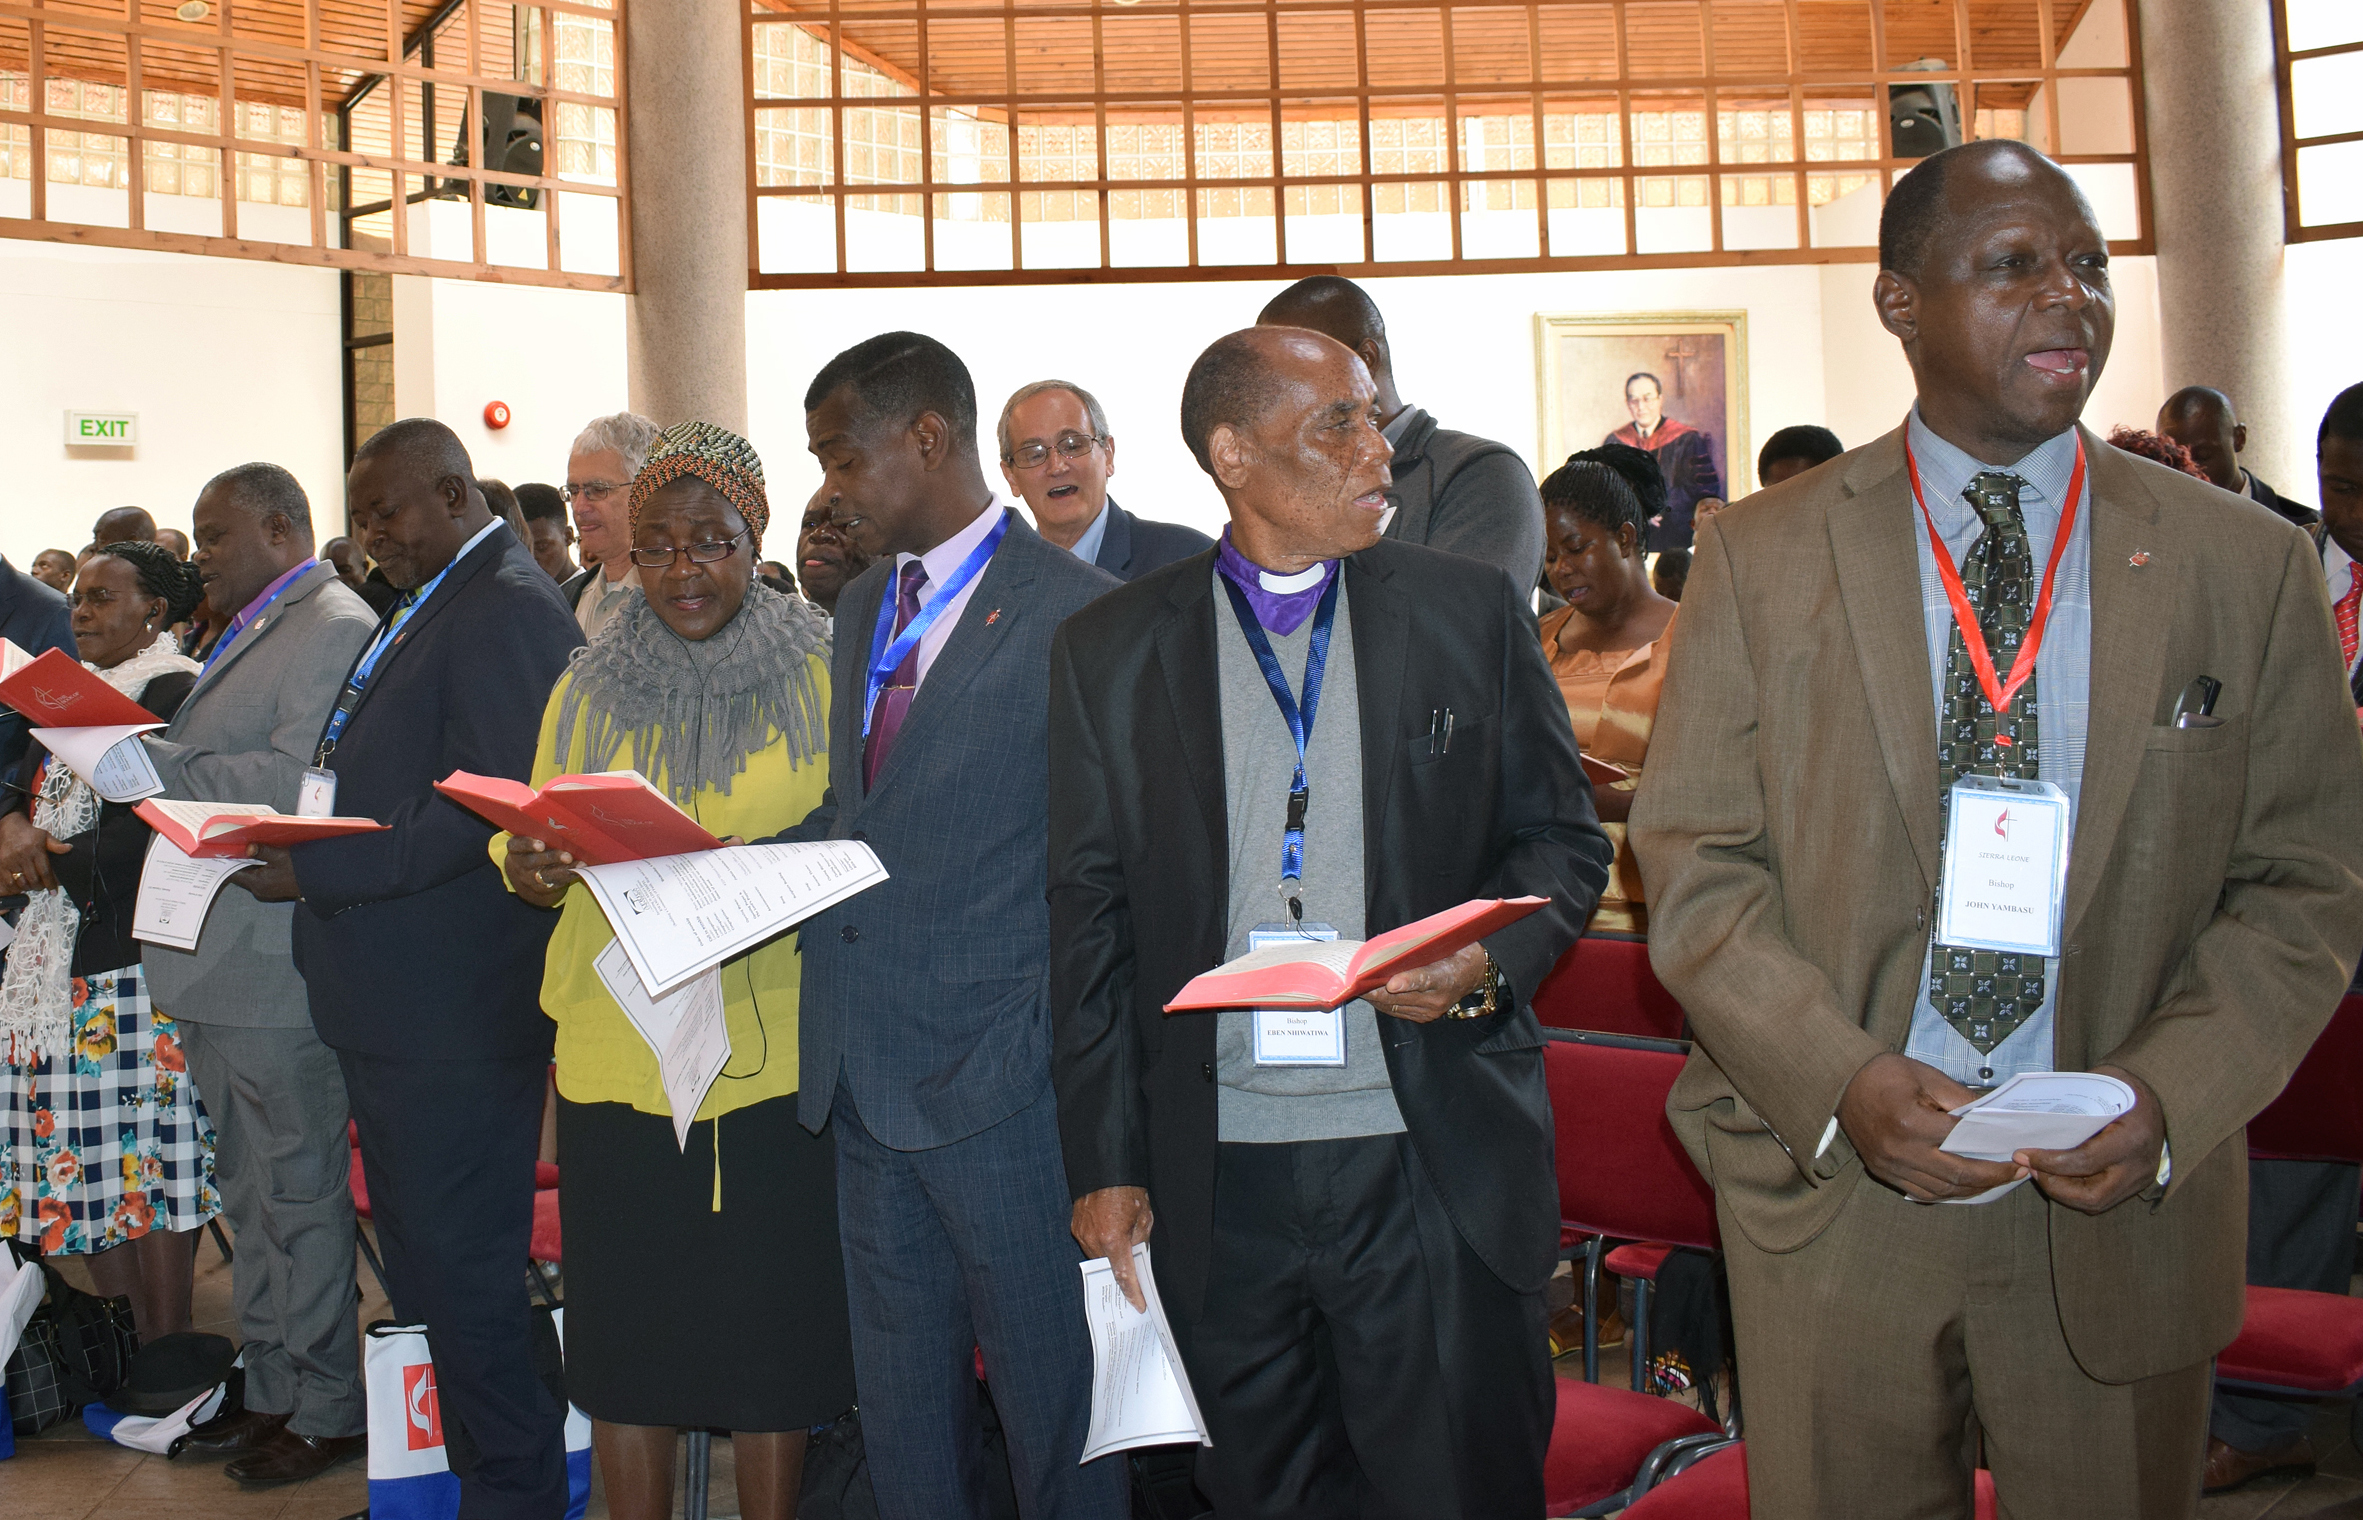 Residential and retired bishops attend worship during the Africa College of Bishops retreat in Mutare, Zimbabwe, in September. Among the issues discussed were the five new episcopal areas starting in 2020. Photo by Eveline Chikwanah, UMNS.